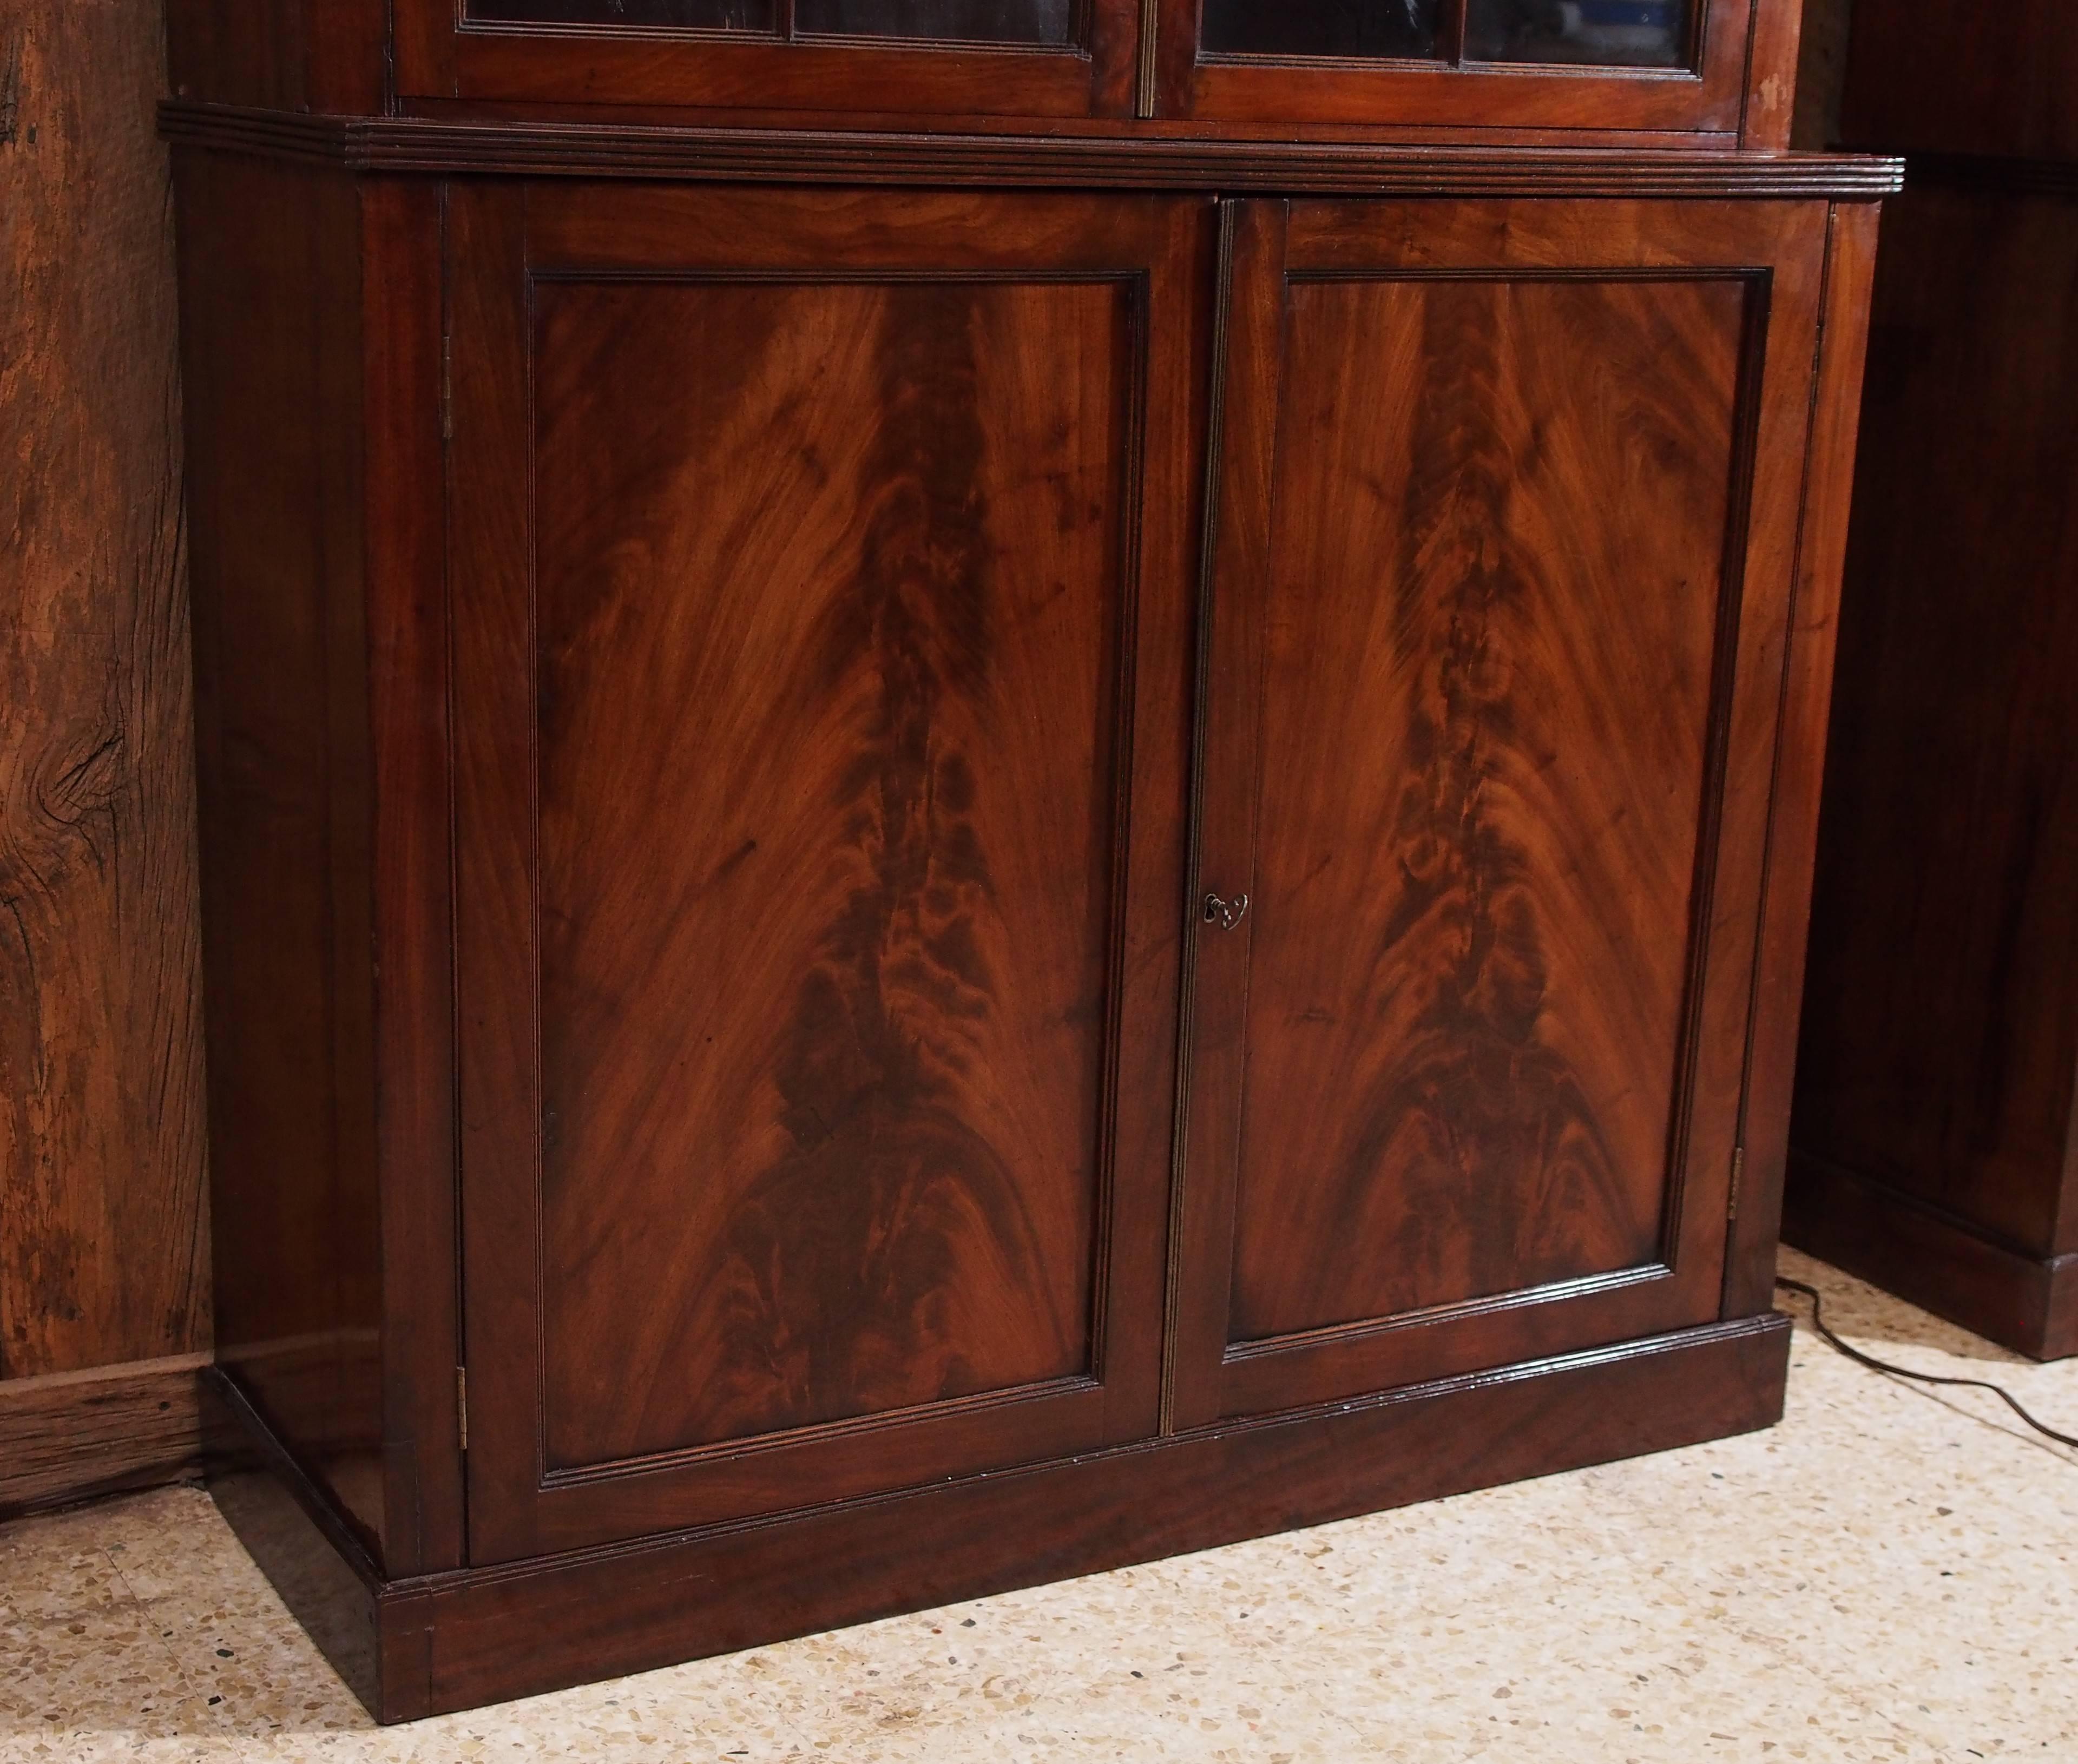 The beautiful coromandel wood on this cabinet is exceptional.